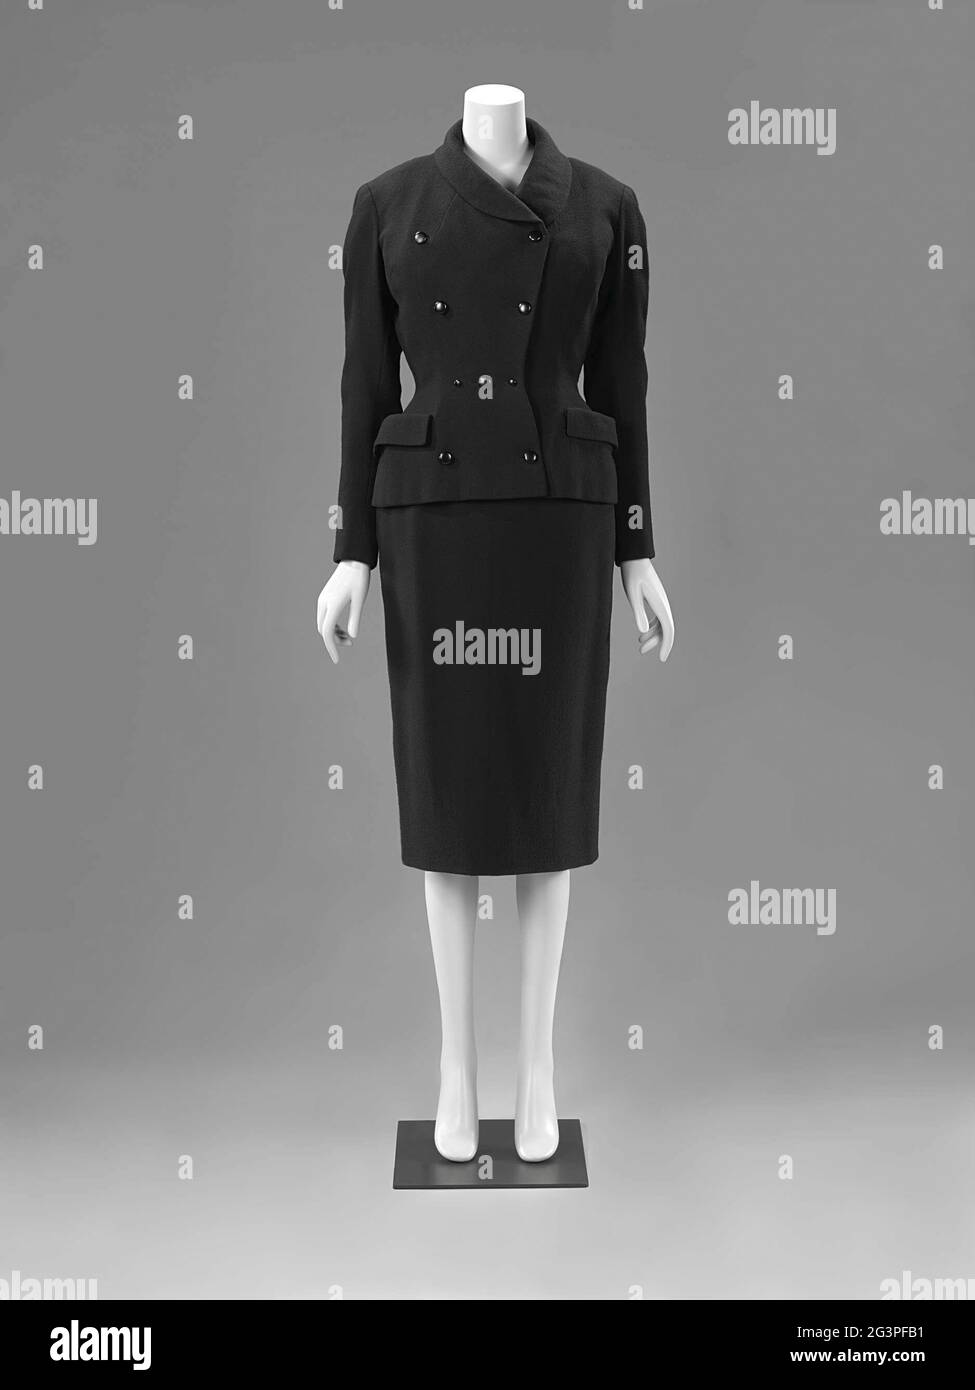 Dress and Jacket (complet). Christian Dior launched the ‘New Look’ in 1947, with pronounced female forms as its distinguishing feature. The hourglass figure is quite distinct here. The nipped-in waist is accentuated by slit pockets at the hips and a tapered placement of the buttons. Mrs Brusse also chose the ensemble because of its name: Urtebise, her maiden name. Stock Photo